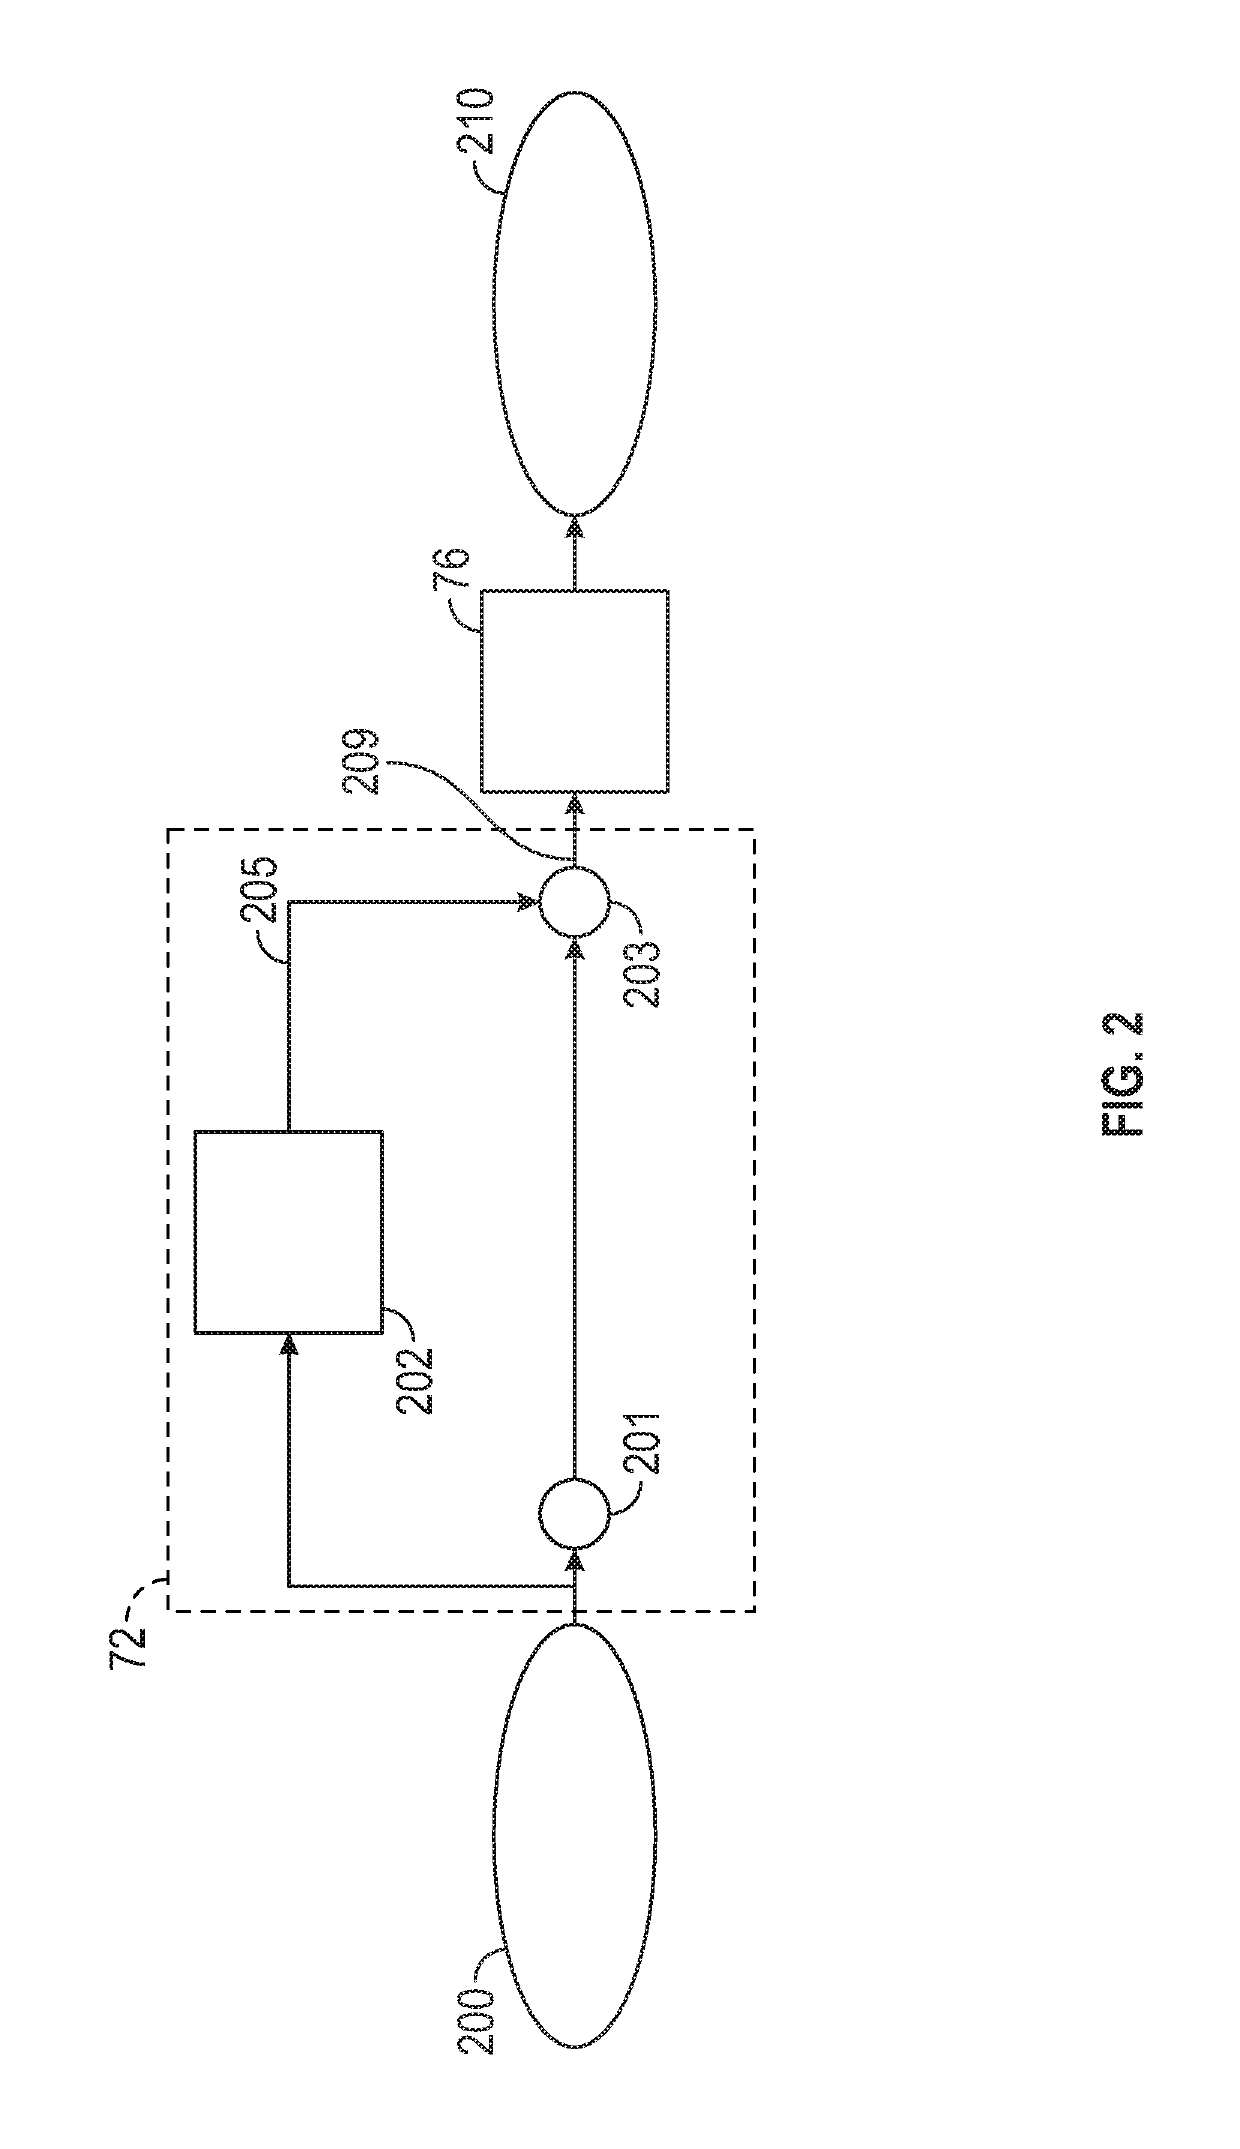 Systems and methods for real-time steering response compensation in vehicles